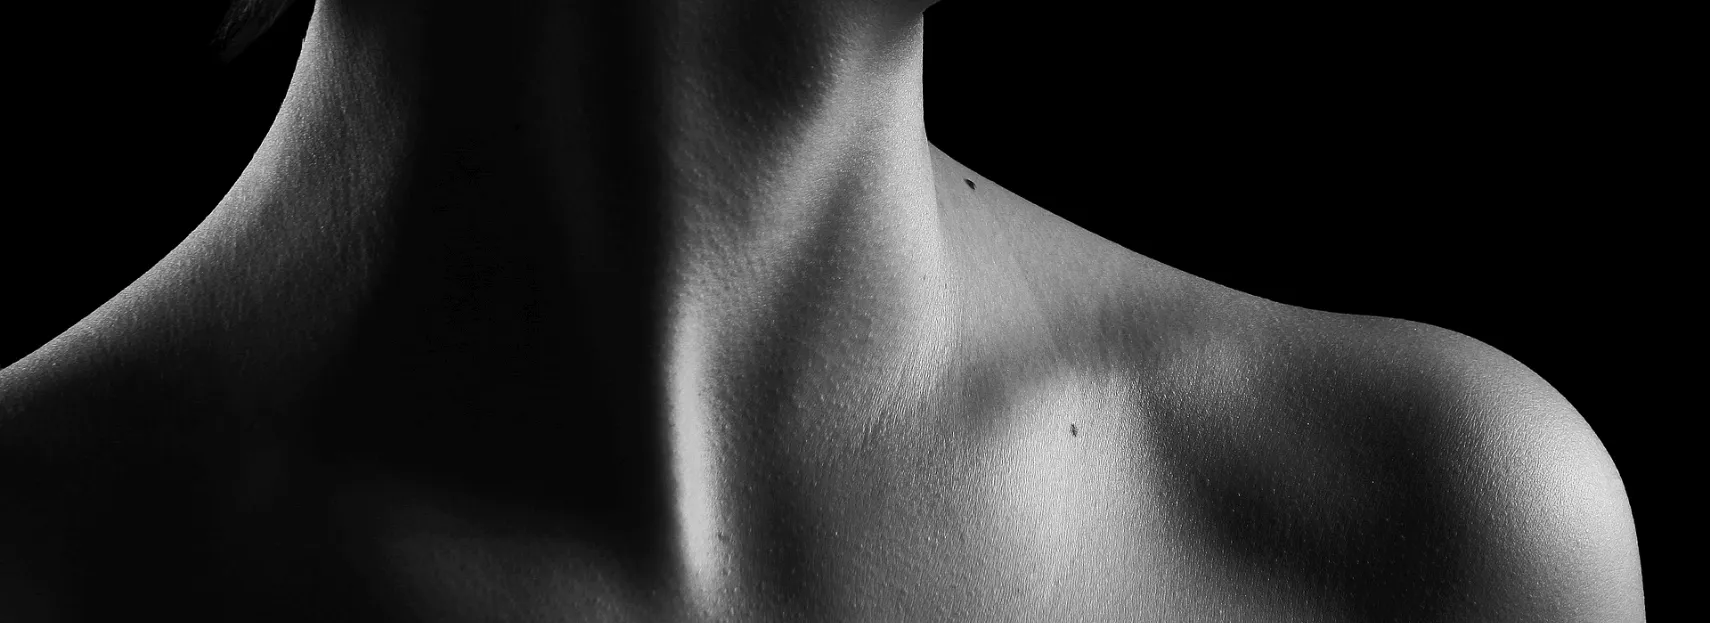 A monochrome side profile of a human neck and shoulder with a play of light and shadow highlighting the contours of the skin, captured by a Sexual Health Expert in Los Angeles.